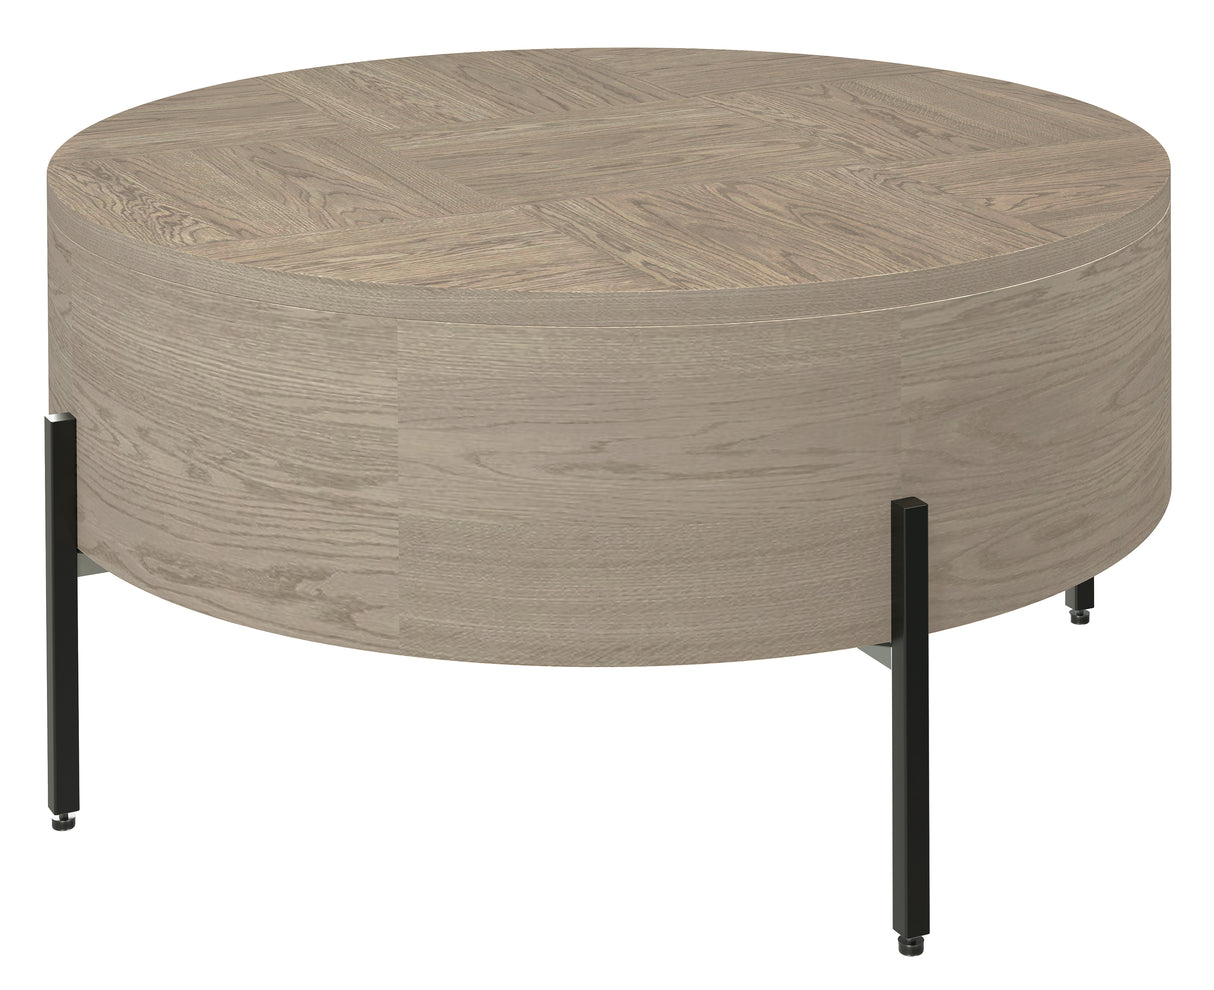 Hekman 25902 Mayfield 40in. x 40in. x 18in. Coffee Table